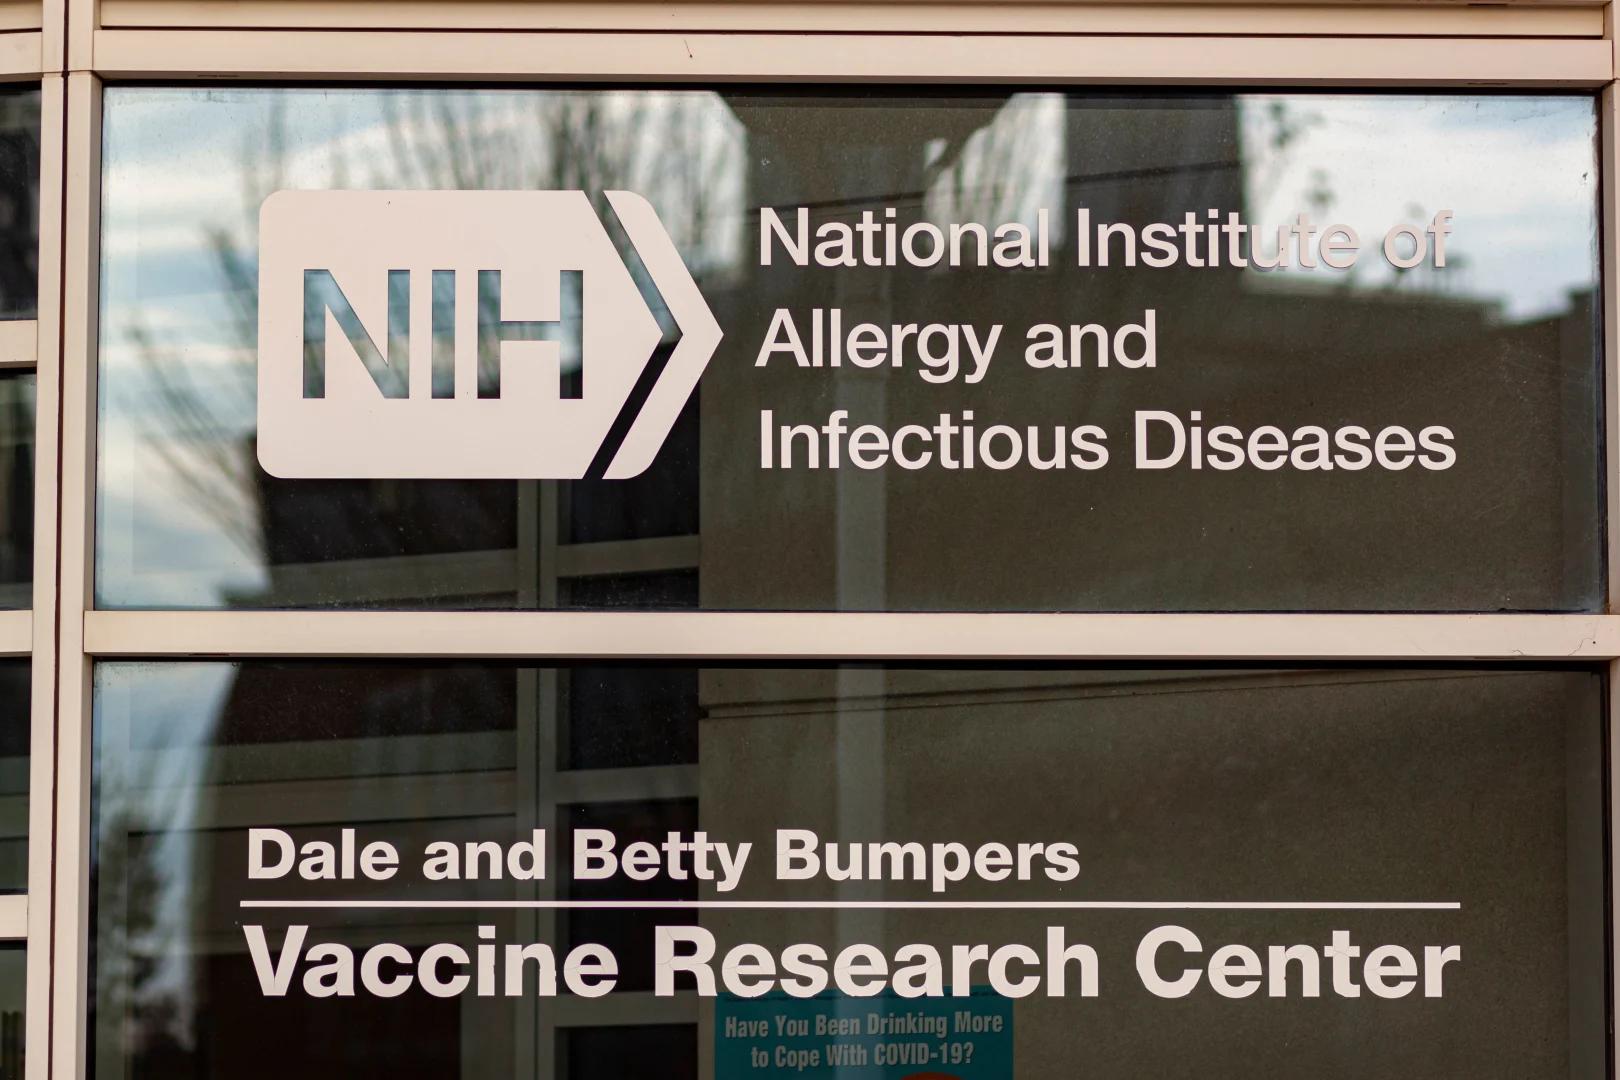 Former NIH director brags about forced vaccinations, gruesome research funding